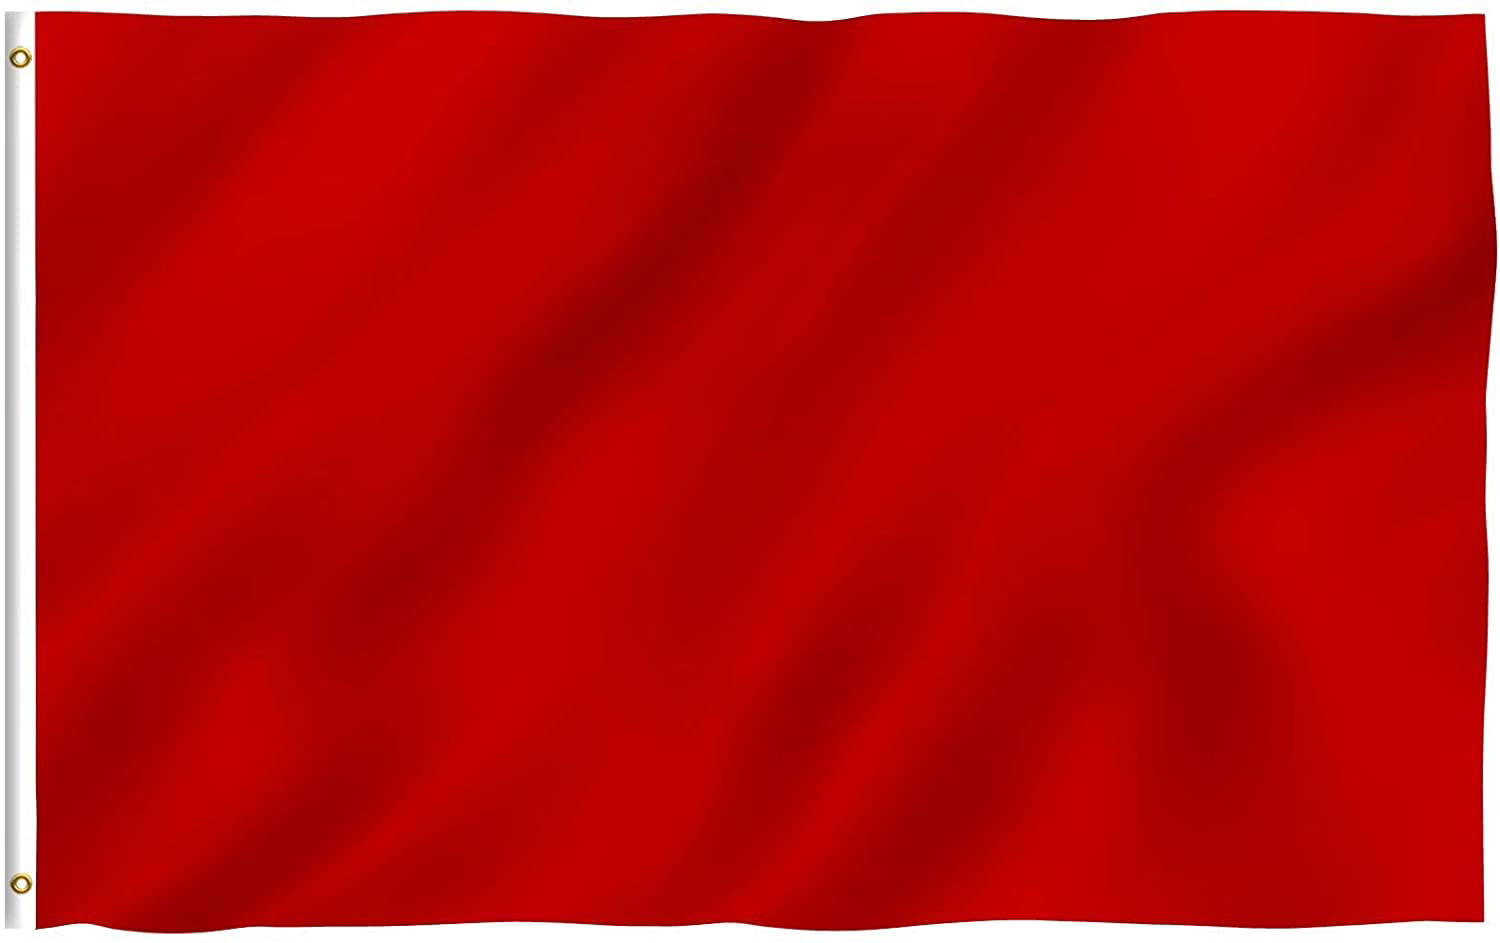 RED FLAG 5 X 3 feet plain colour polyester with eyelets flags sport race 